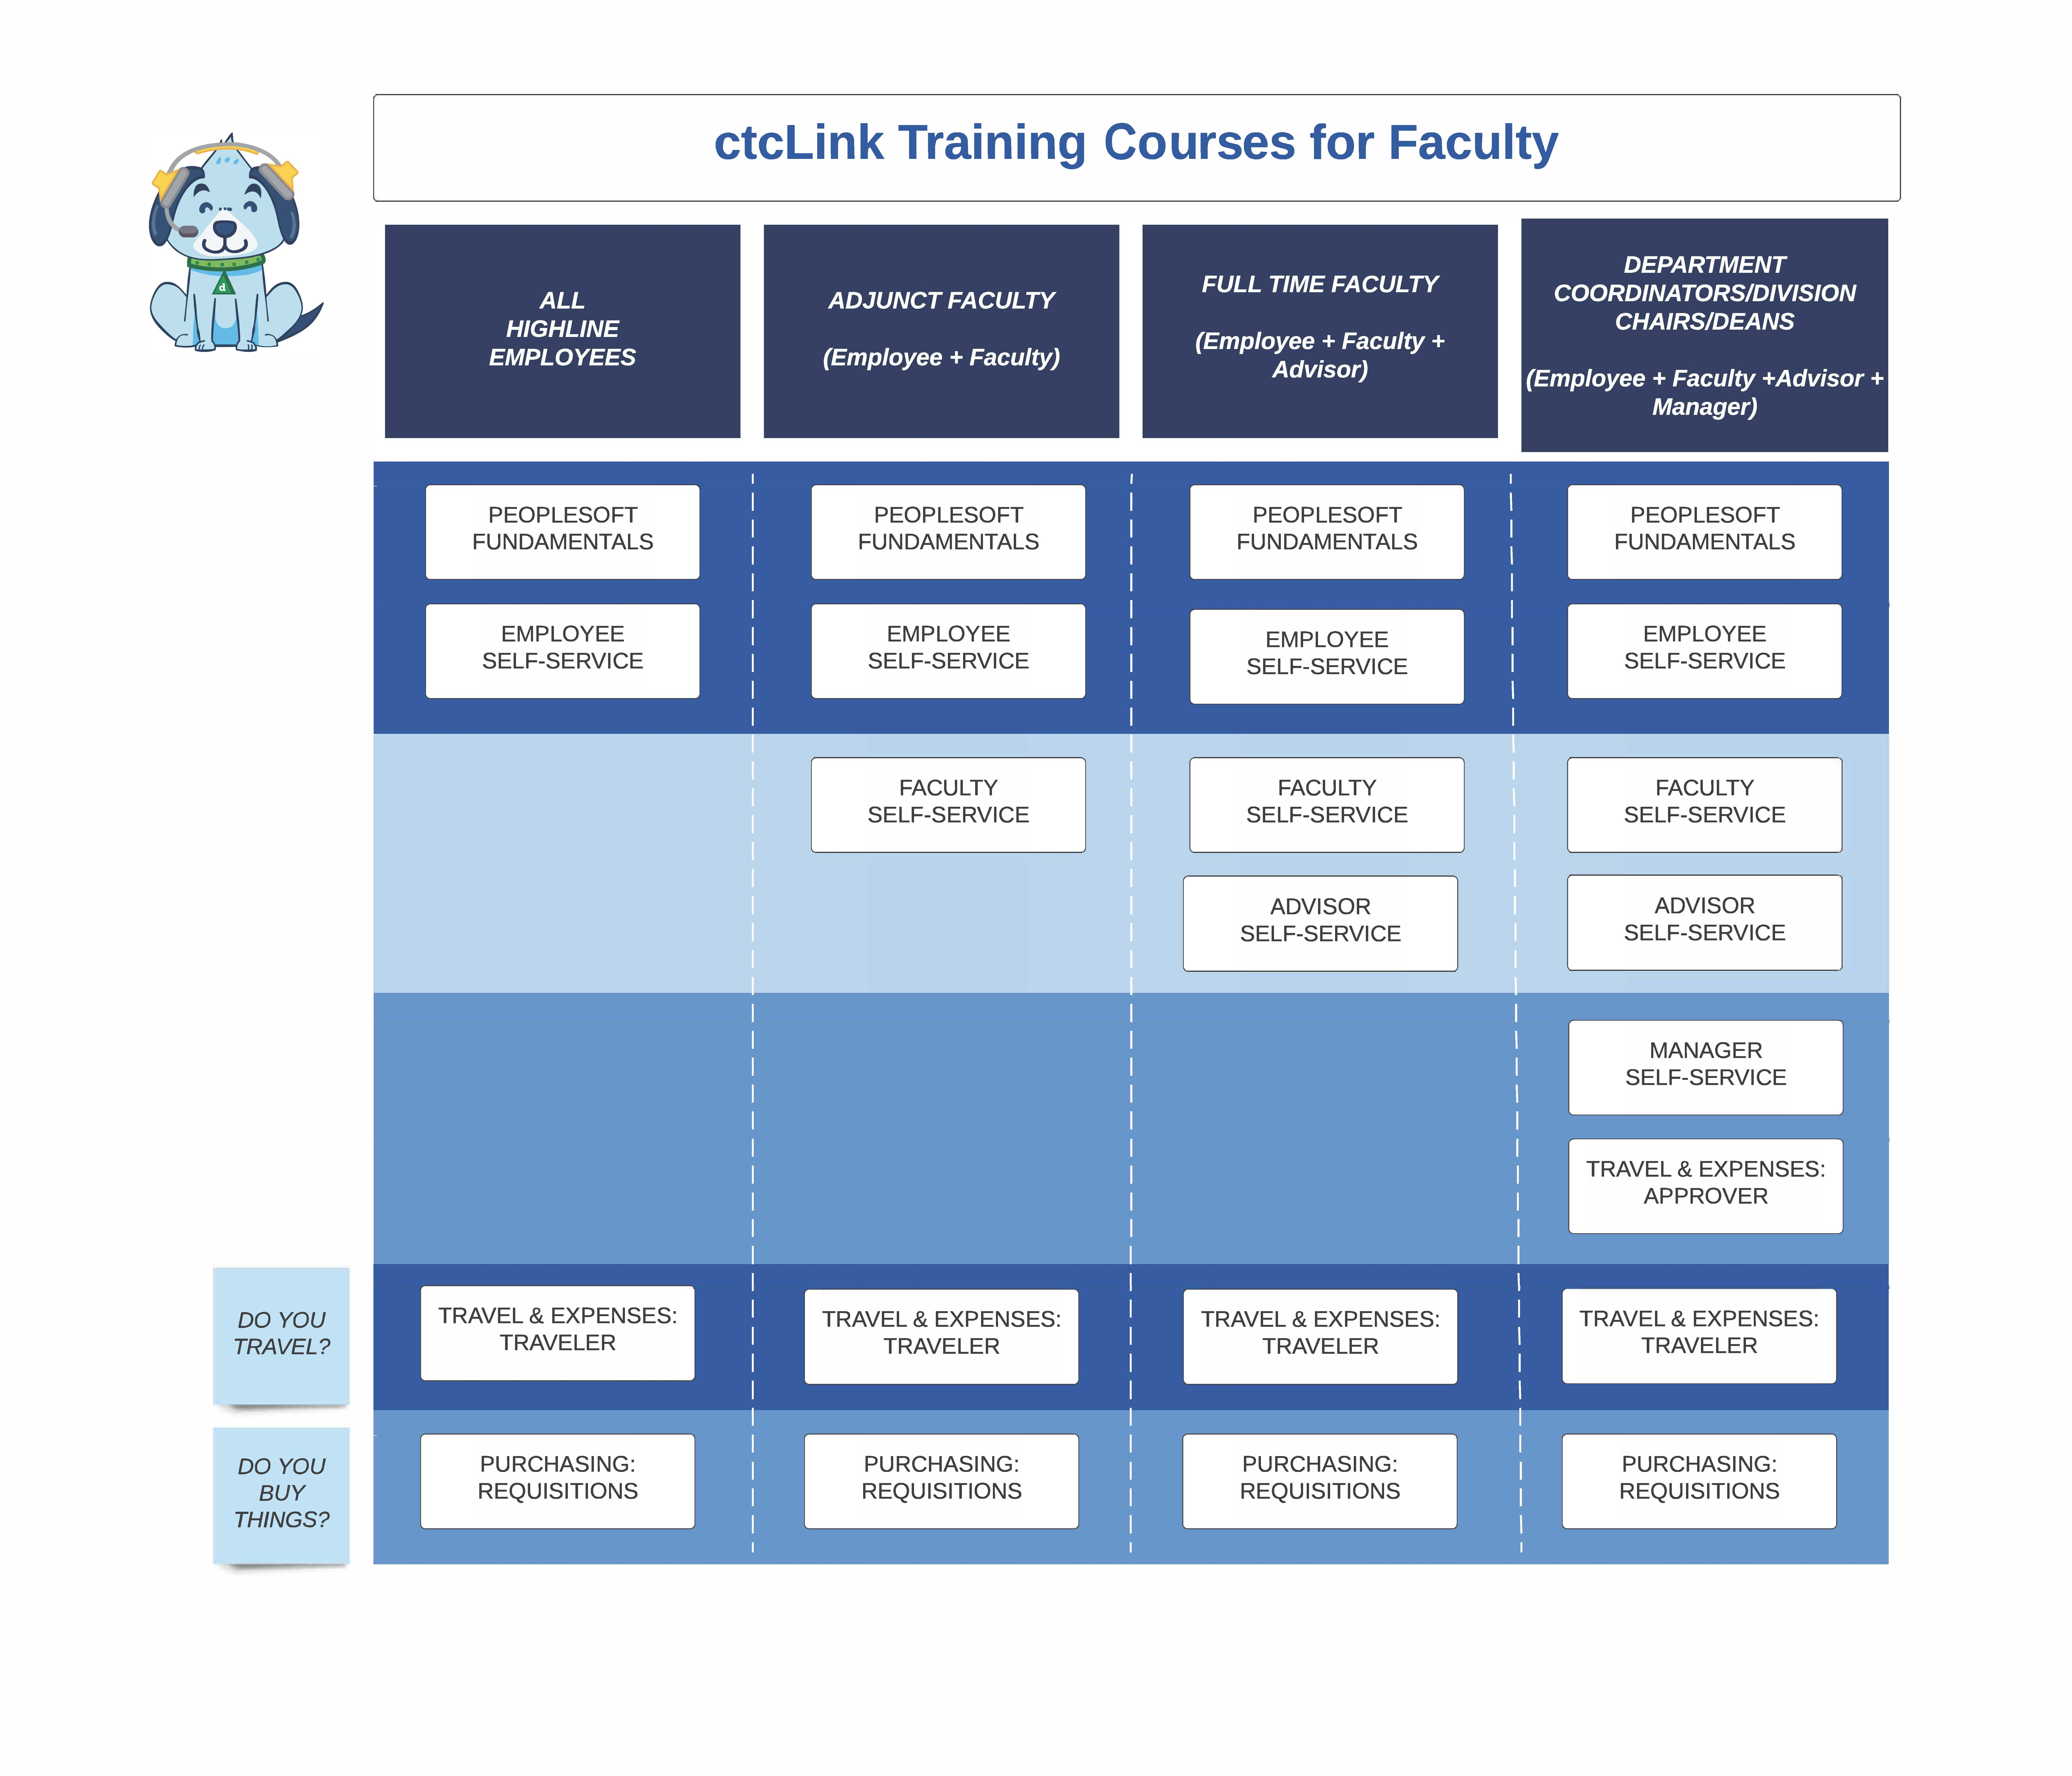 ctcLink Training Courses for Faculty